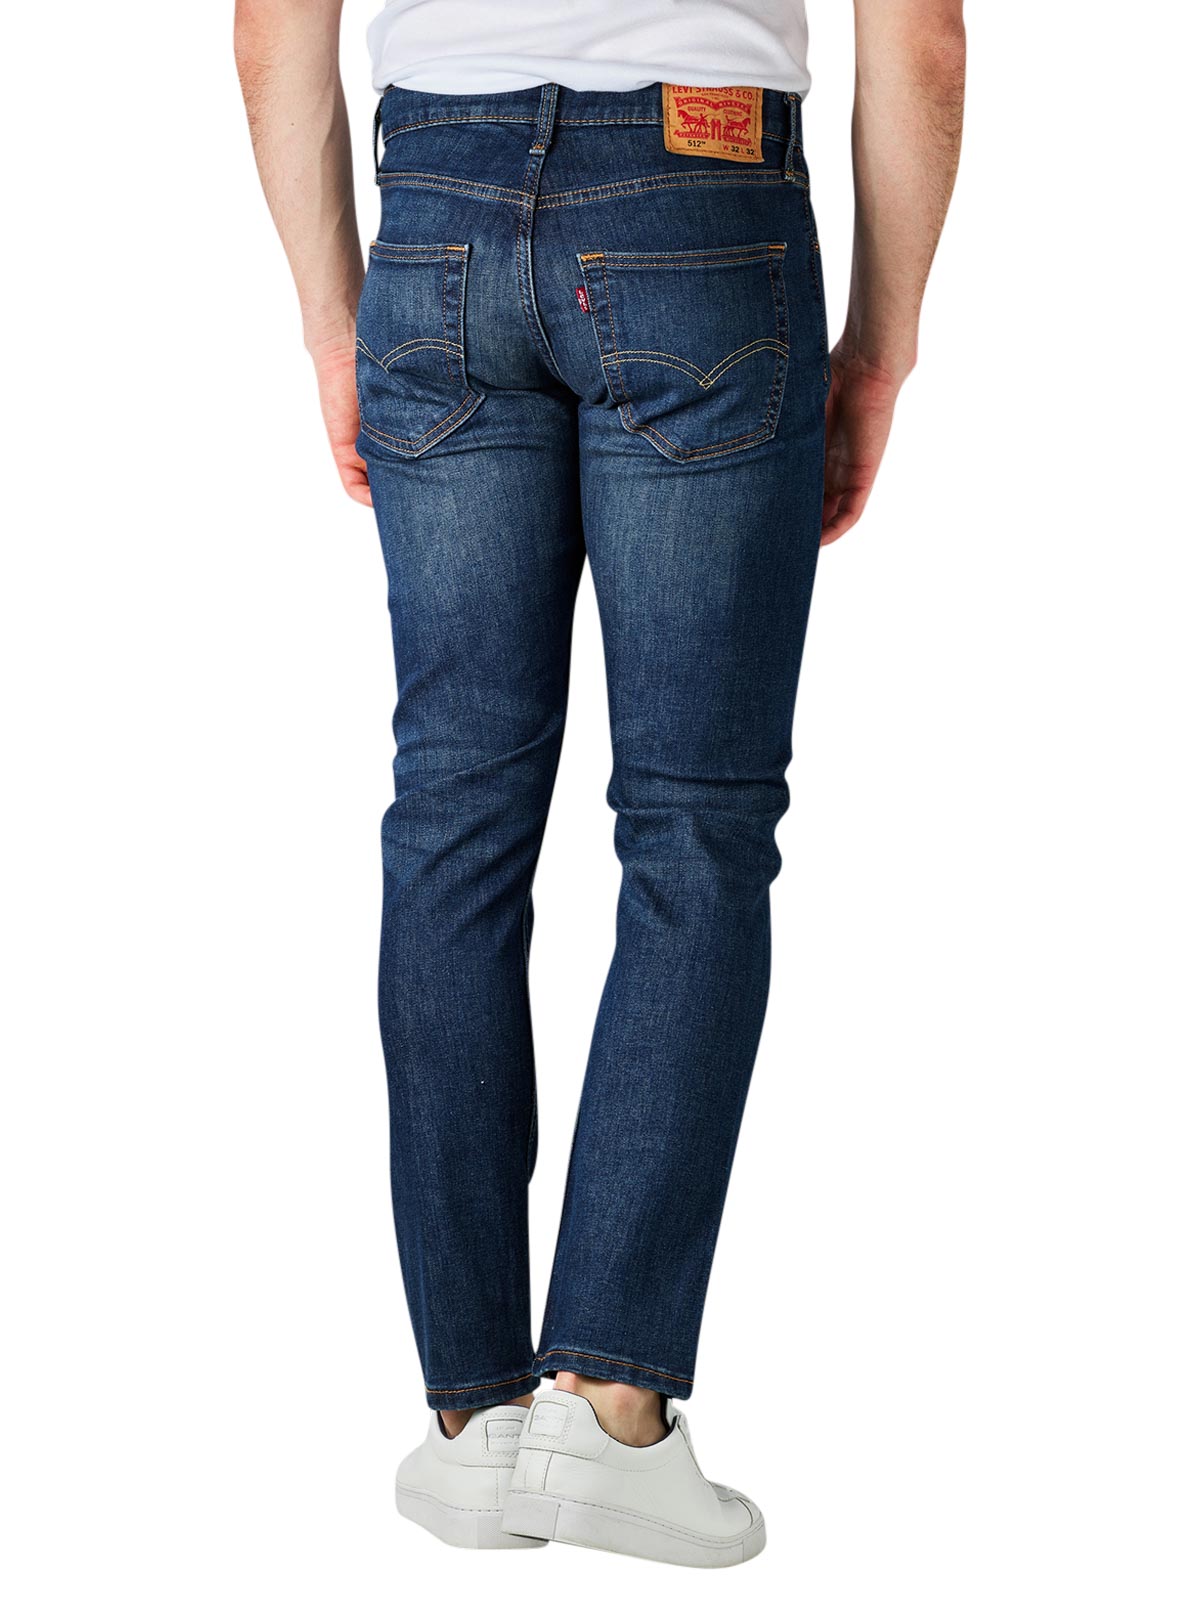 Levi's 512 Jeans Slim Tapered Fit Red Haze Levi's Men's Jeans | Free  Shipping on  - SIMPLY LOOK GOOD